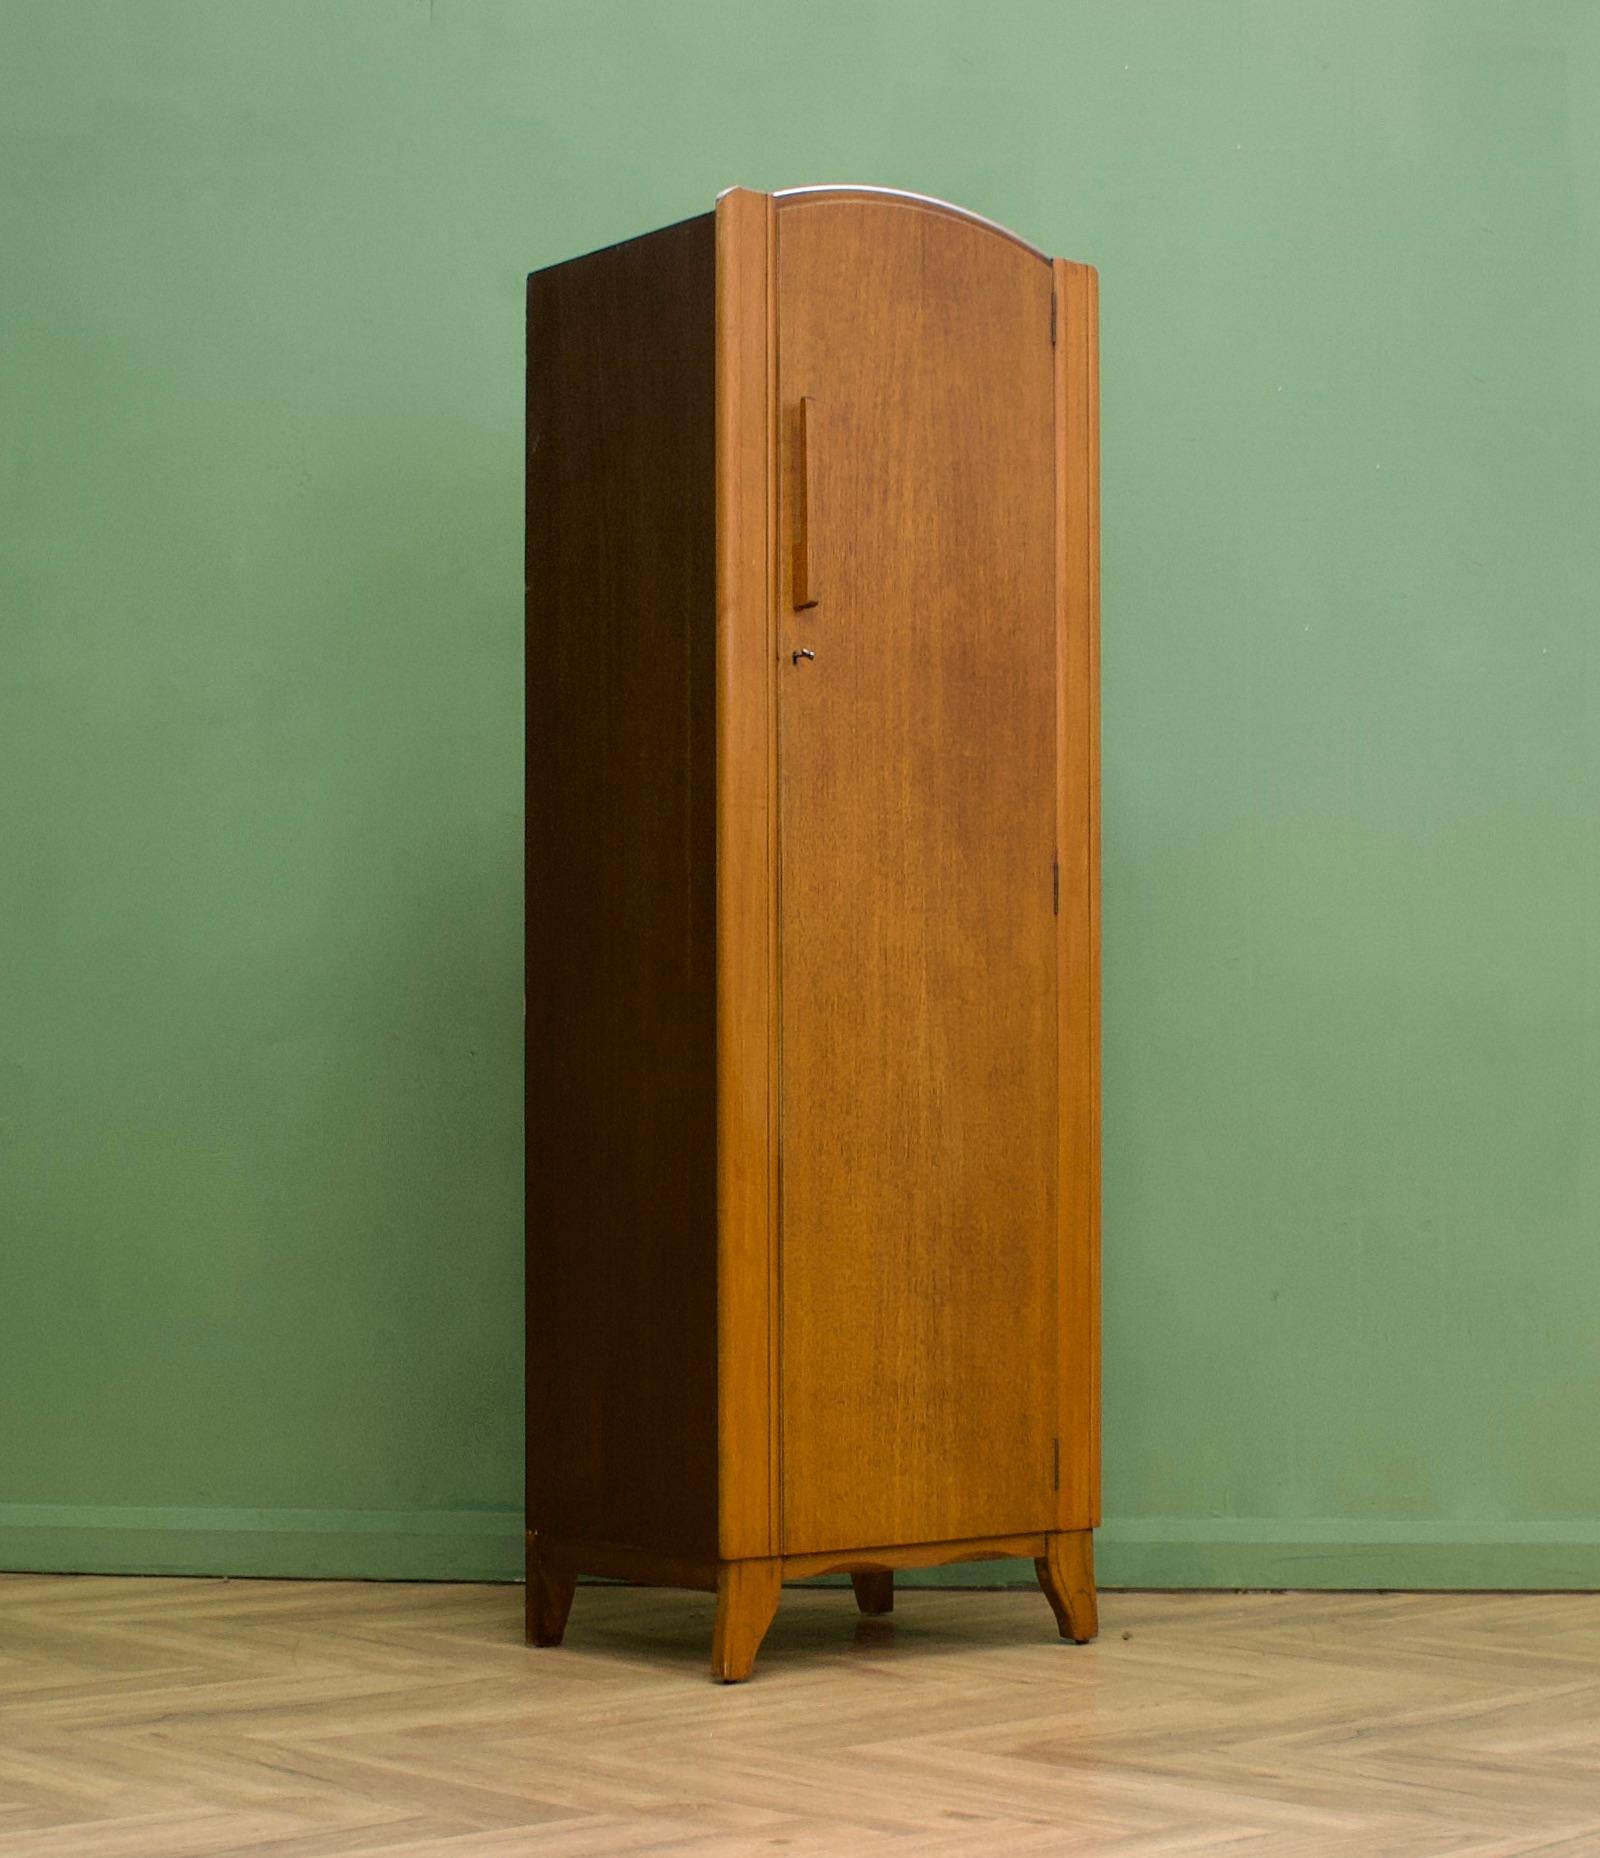 Mid-20th Century British Vintage Art Deco Style Oak Wardrobe from Lebus, 1950s For Sale